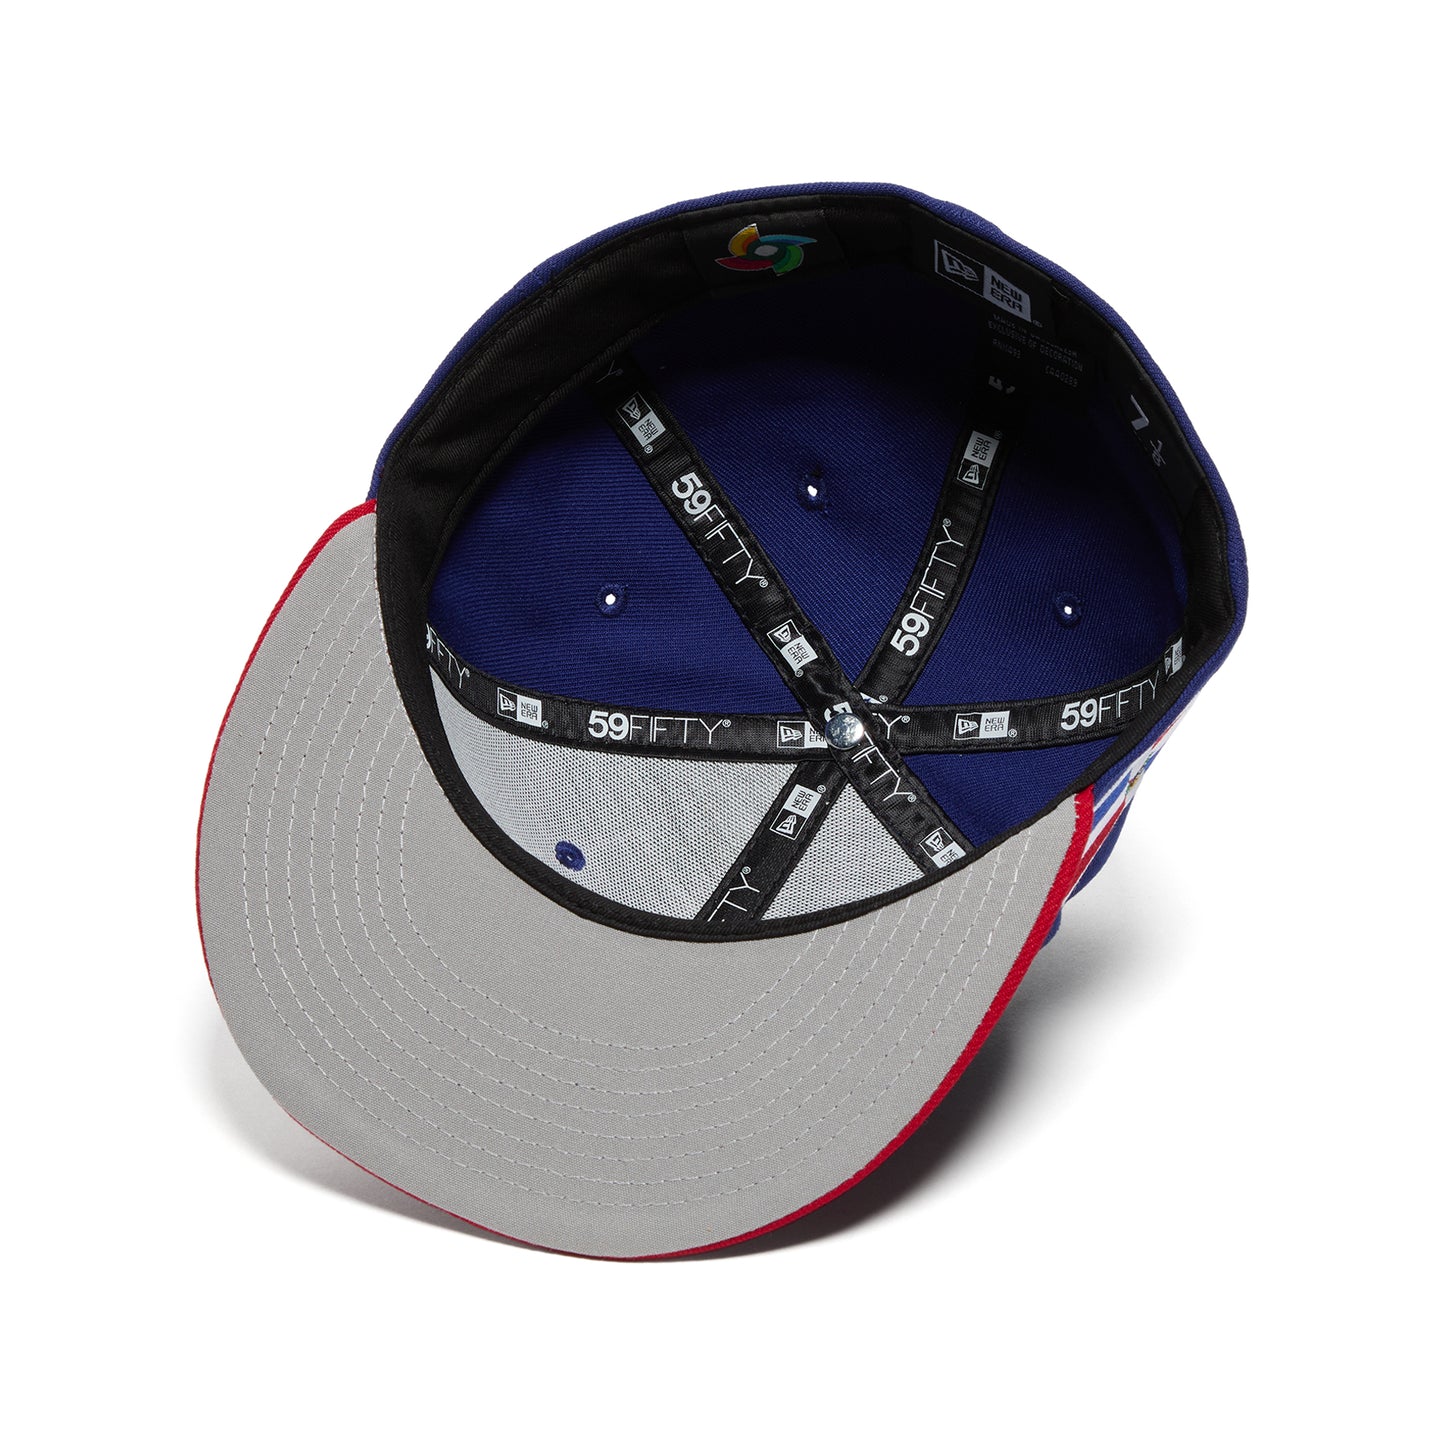 New Era Dominican Republic 2023 World Baseball Classic 59Fifty Fitted Hat (Blue)